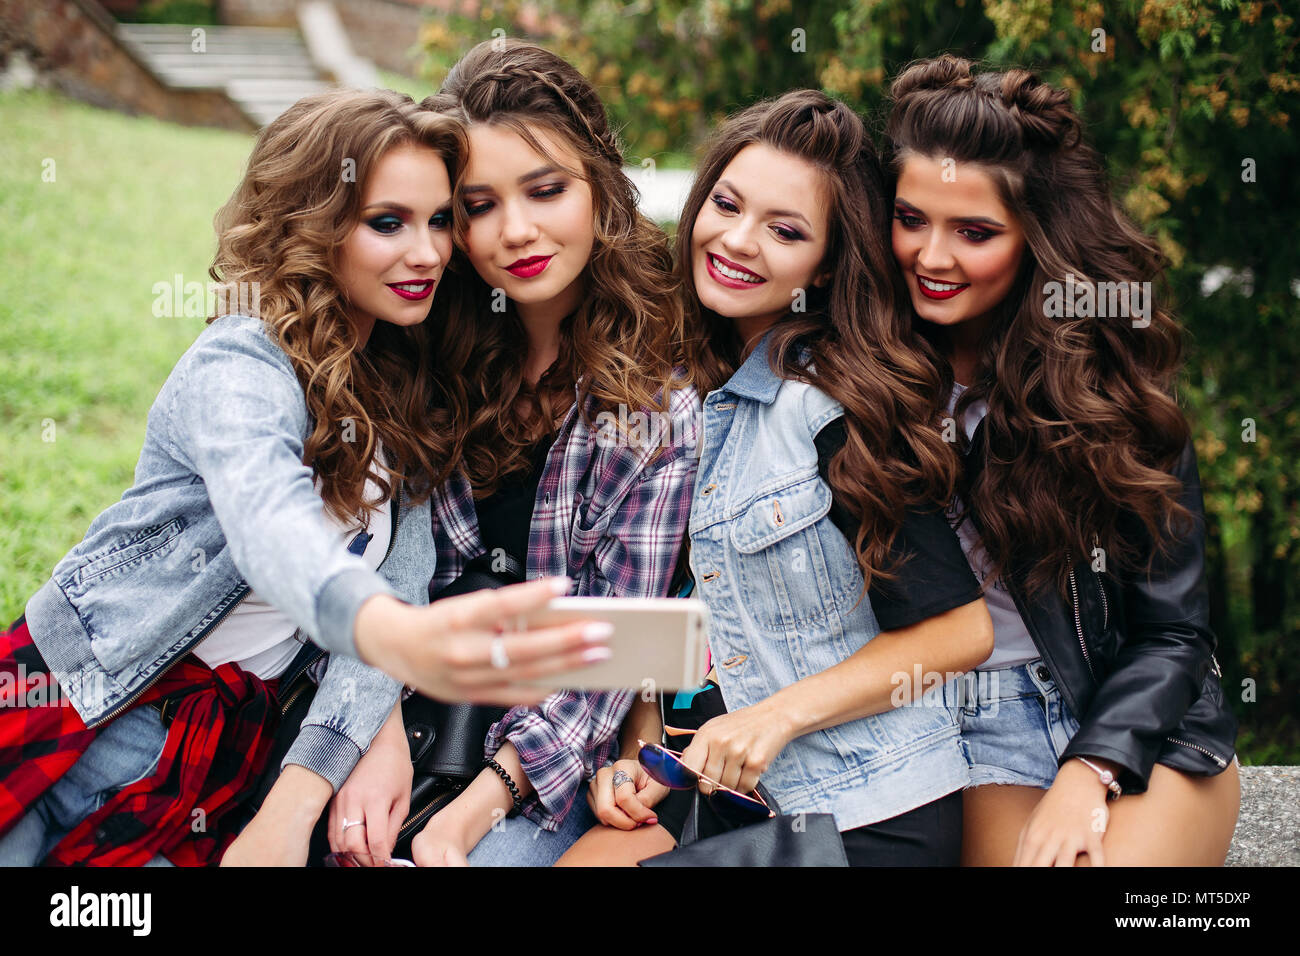 Fashionable ladies with hairstyle taking selfie outdoors. Stock Photo